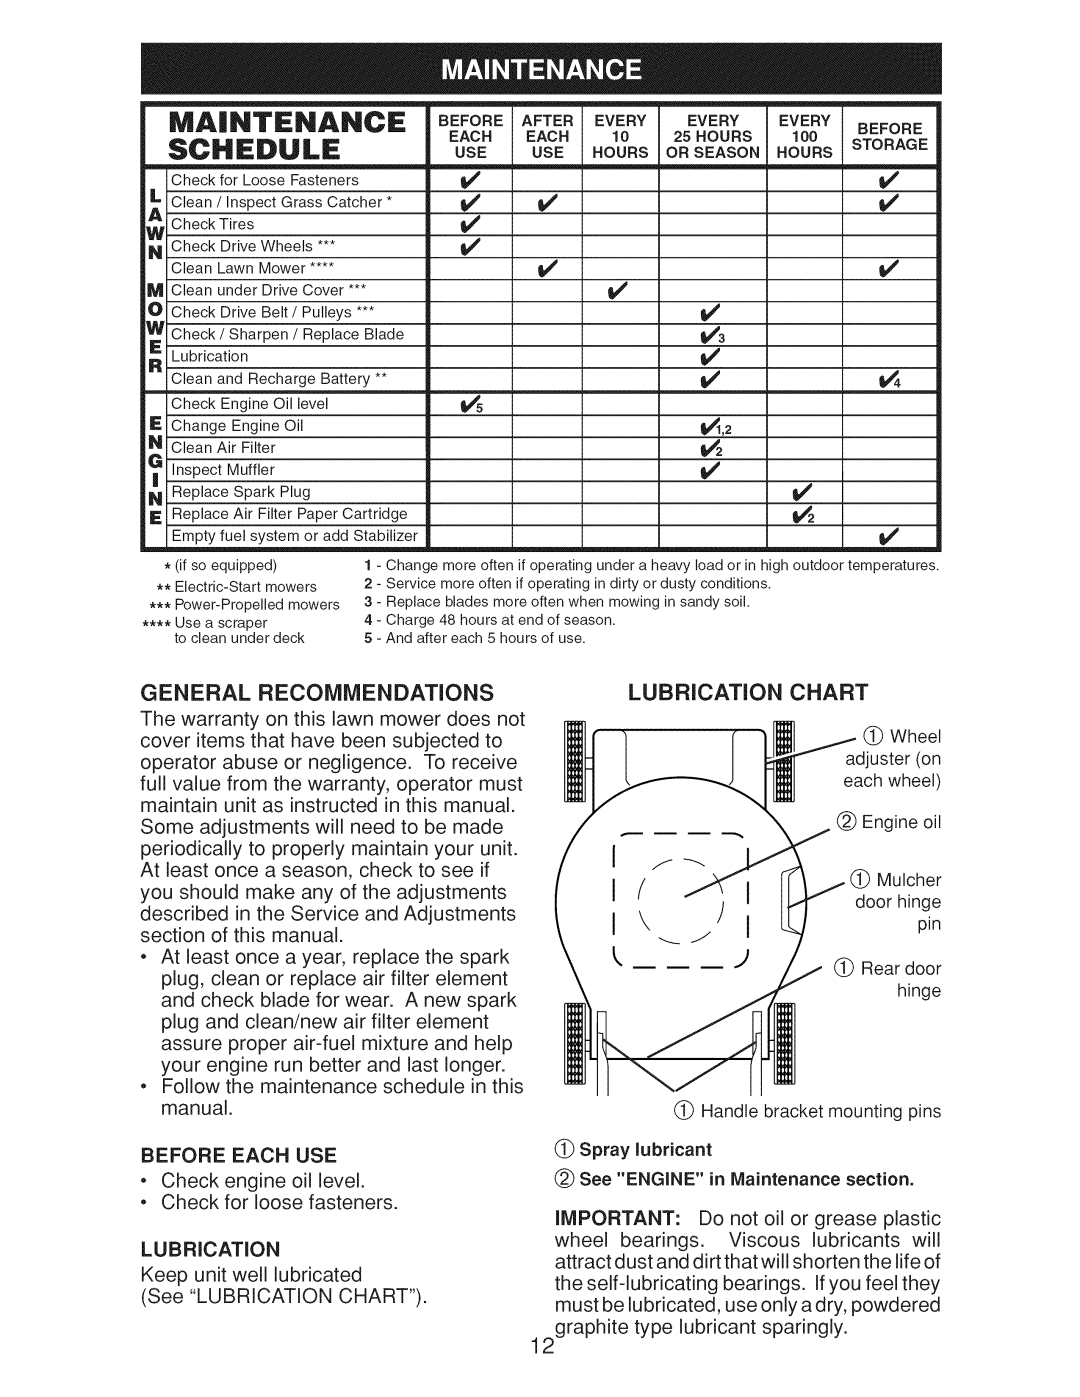 Craftsman Gcv160 Schedule, Maintenance, Beforeafterevery Every Every Before, General Recommendations, Lubrication Chart 